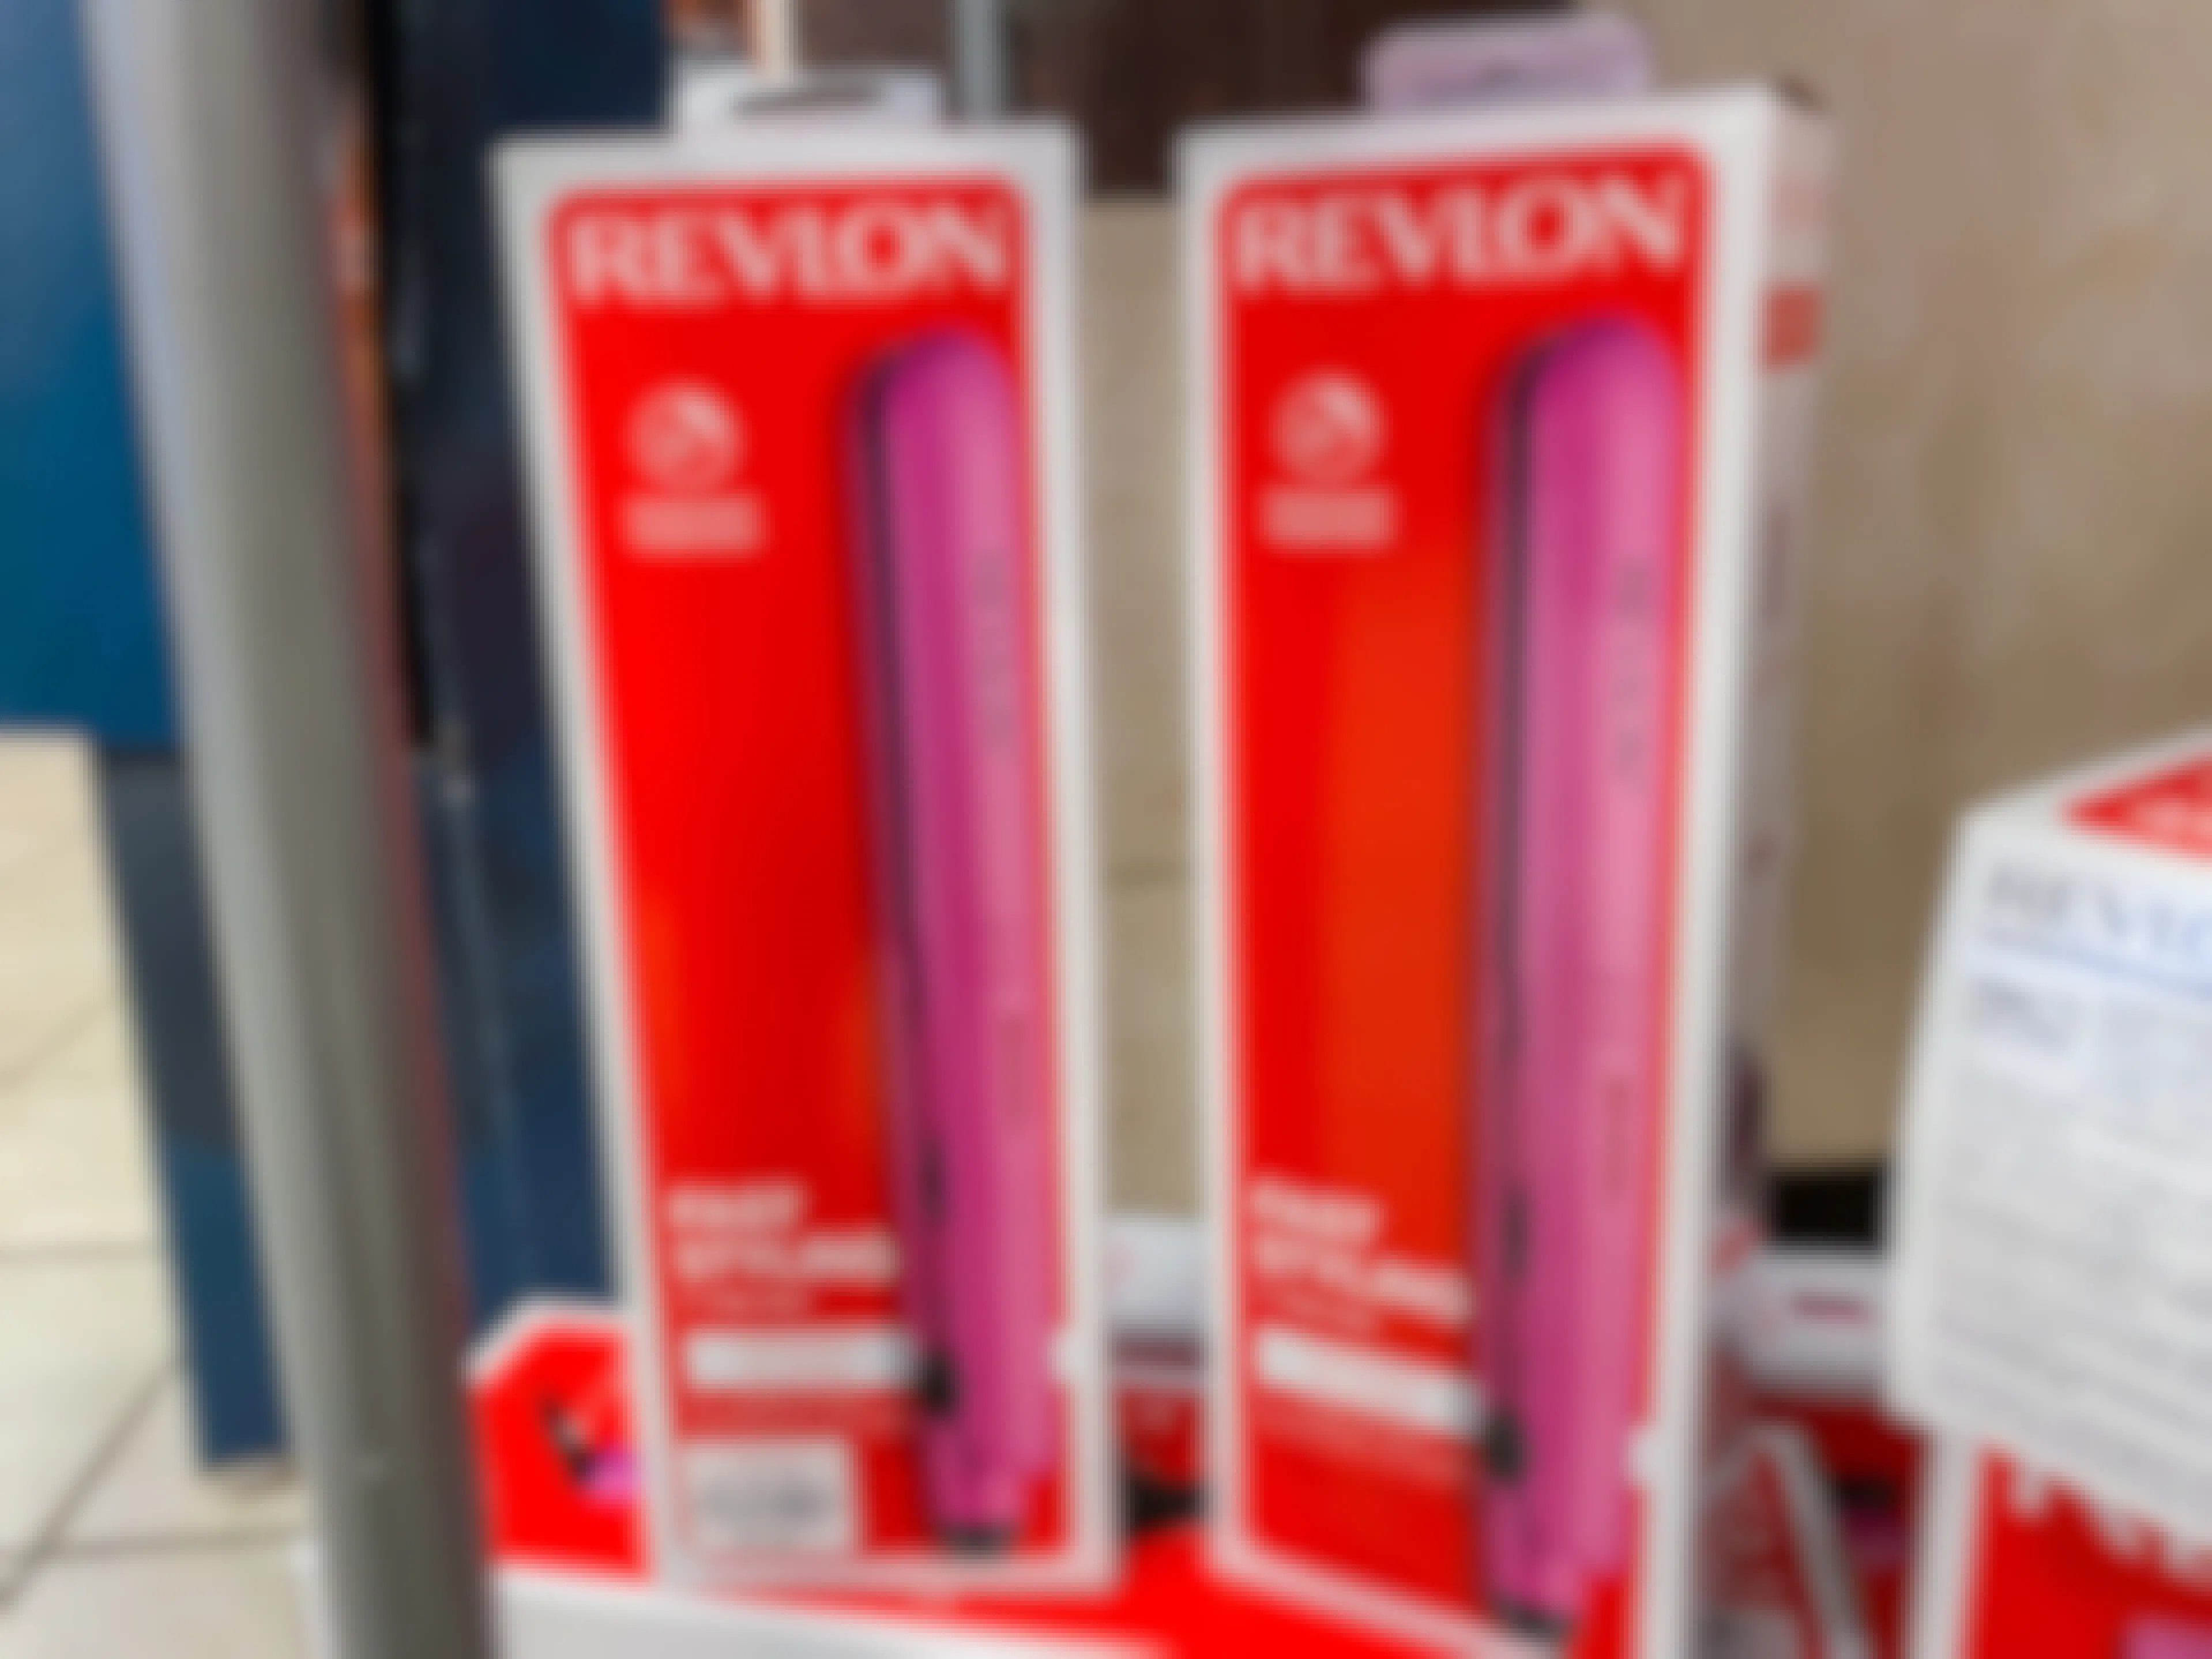 revlon flat irons next to each other in the box